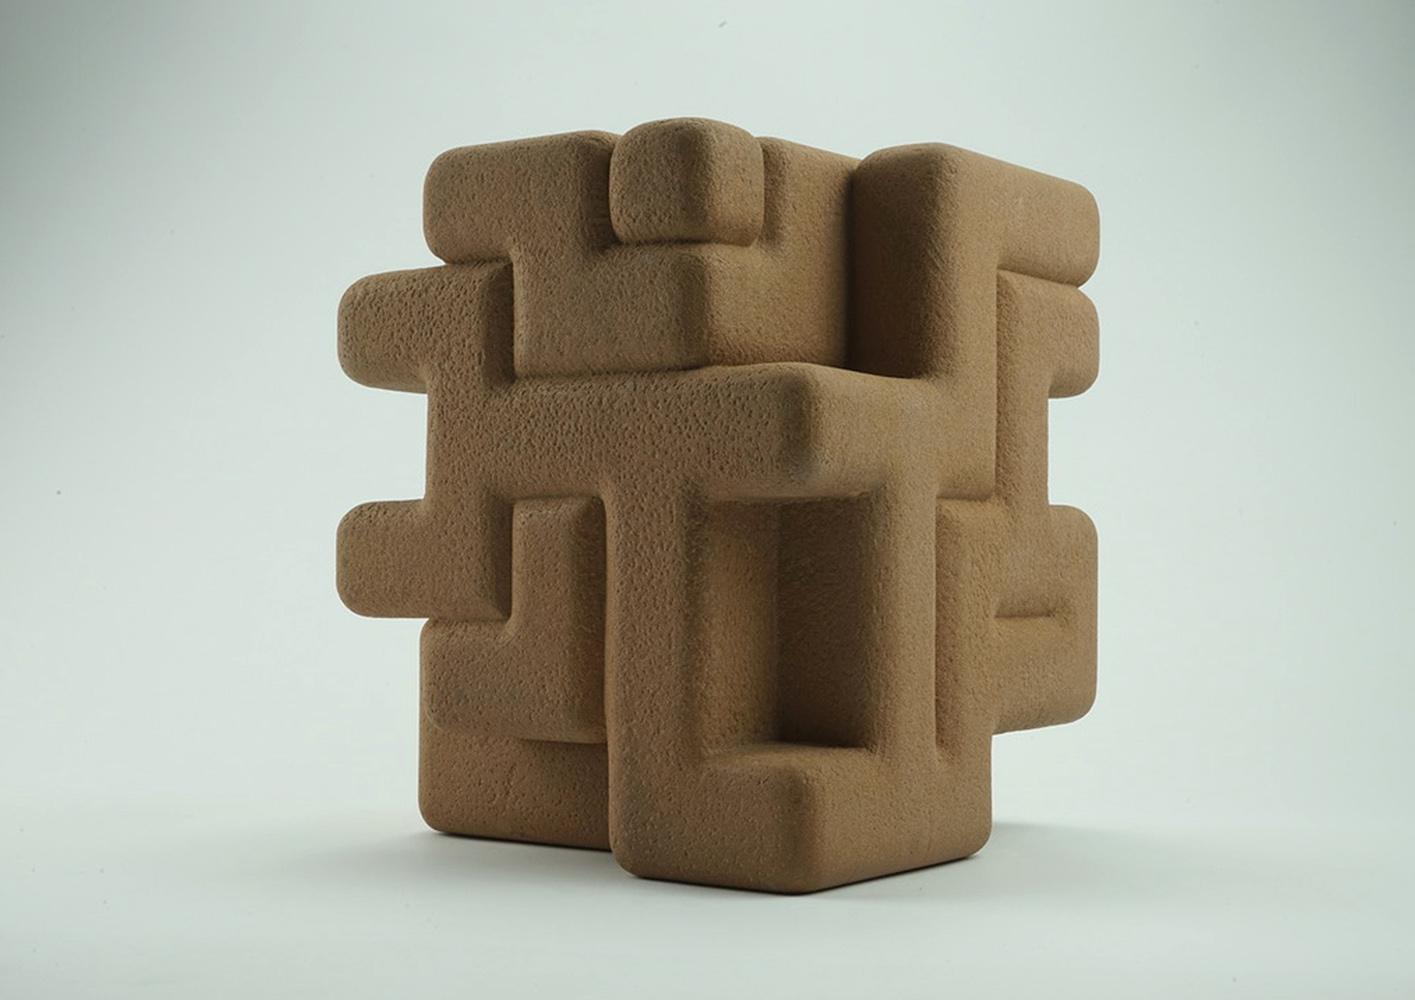 Six sides to a cube by British artist Richard Perry (b. 1960).
Unique work. Mansfield red sandstone sculpture, 26 cm × 22 cm × 22 cm // 10.24 x 8.66 x 8.66 in.
This piece is typical of the geometric language the sculptor developed in the 2010s